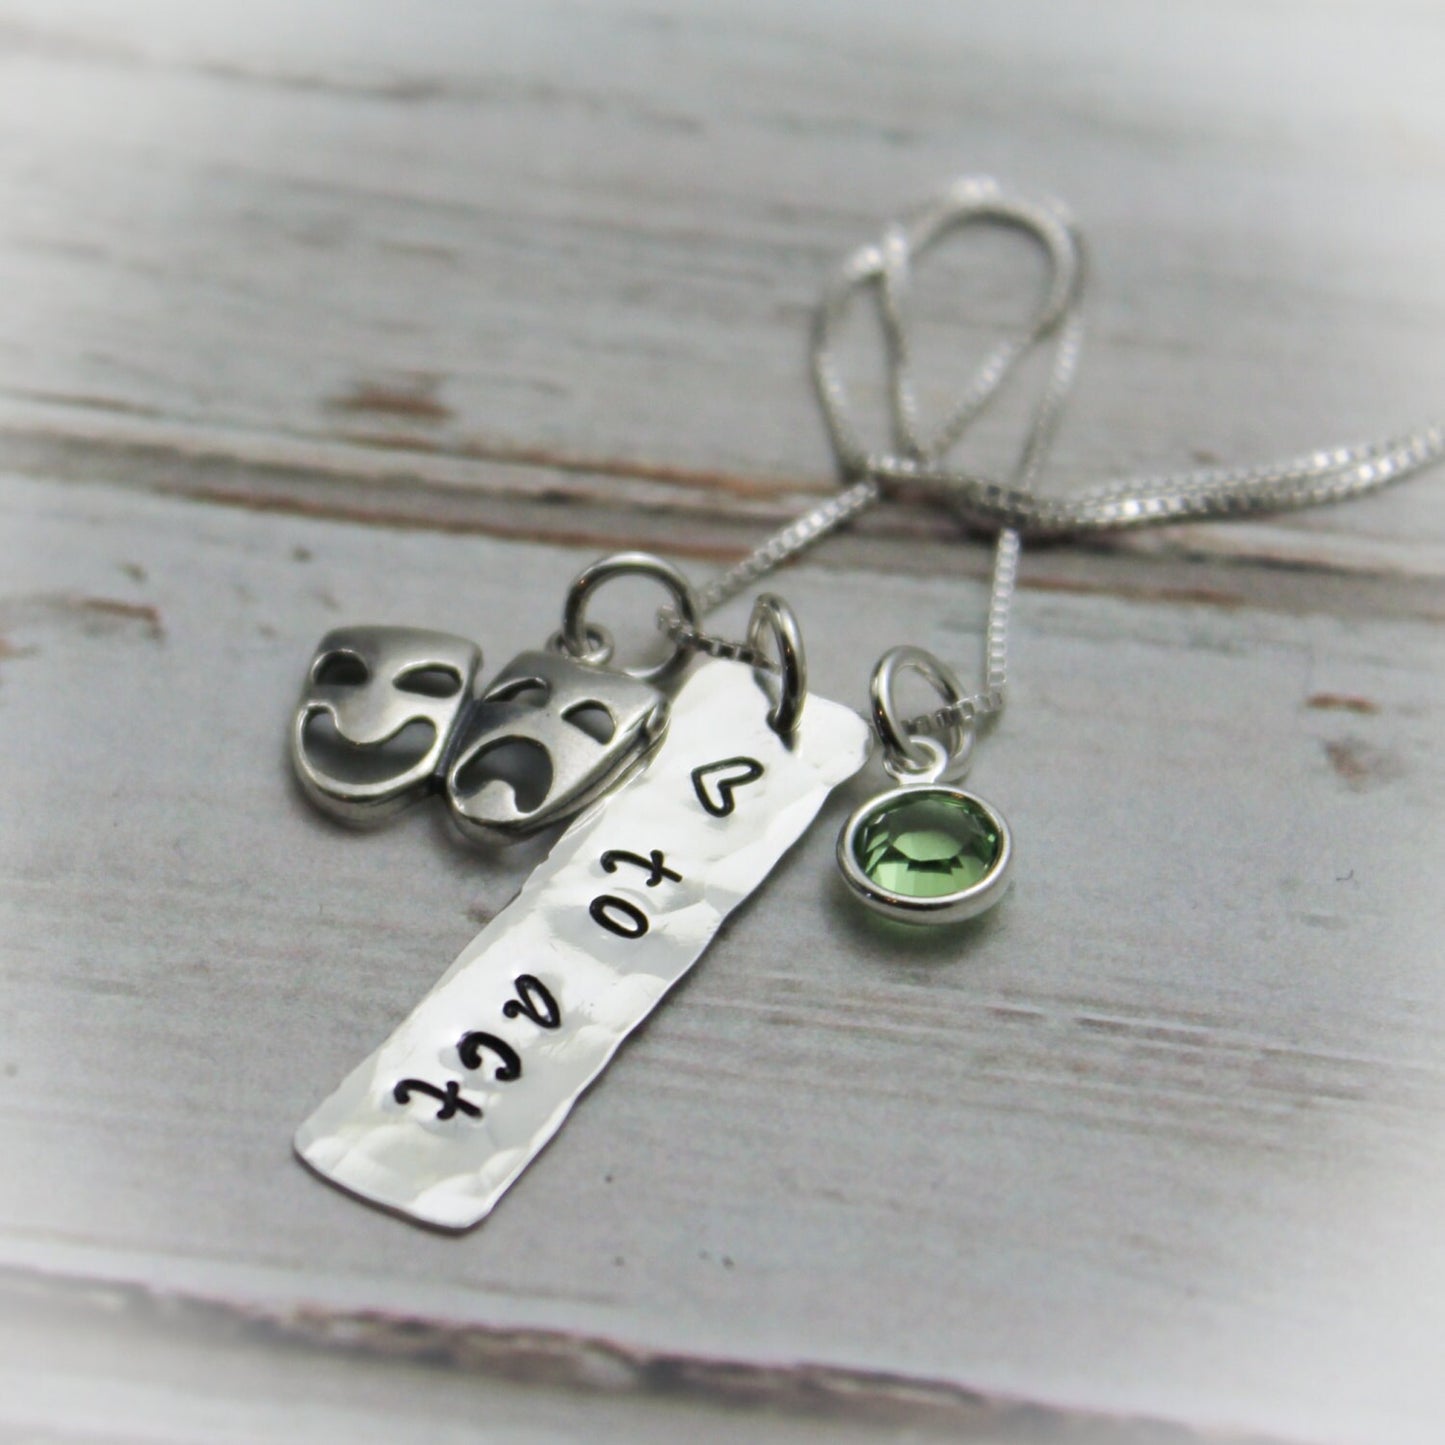 Love to Act Theater Actor Necklace, Personalized Theater Acting Necklace, Comedy Tragedy Charm Sterling Silver Personalized Hand Stamped